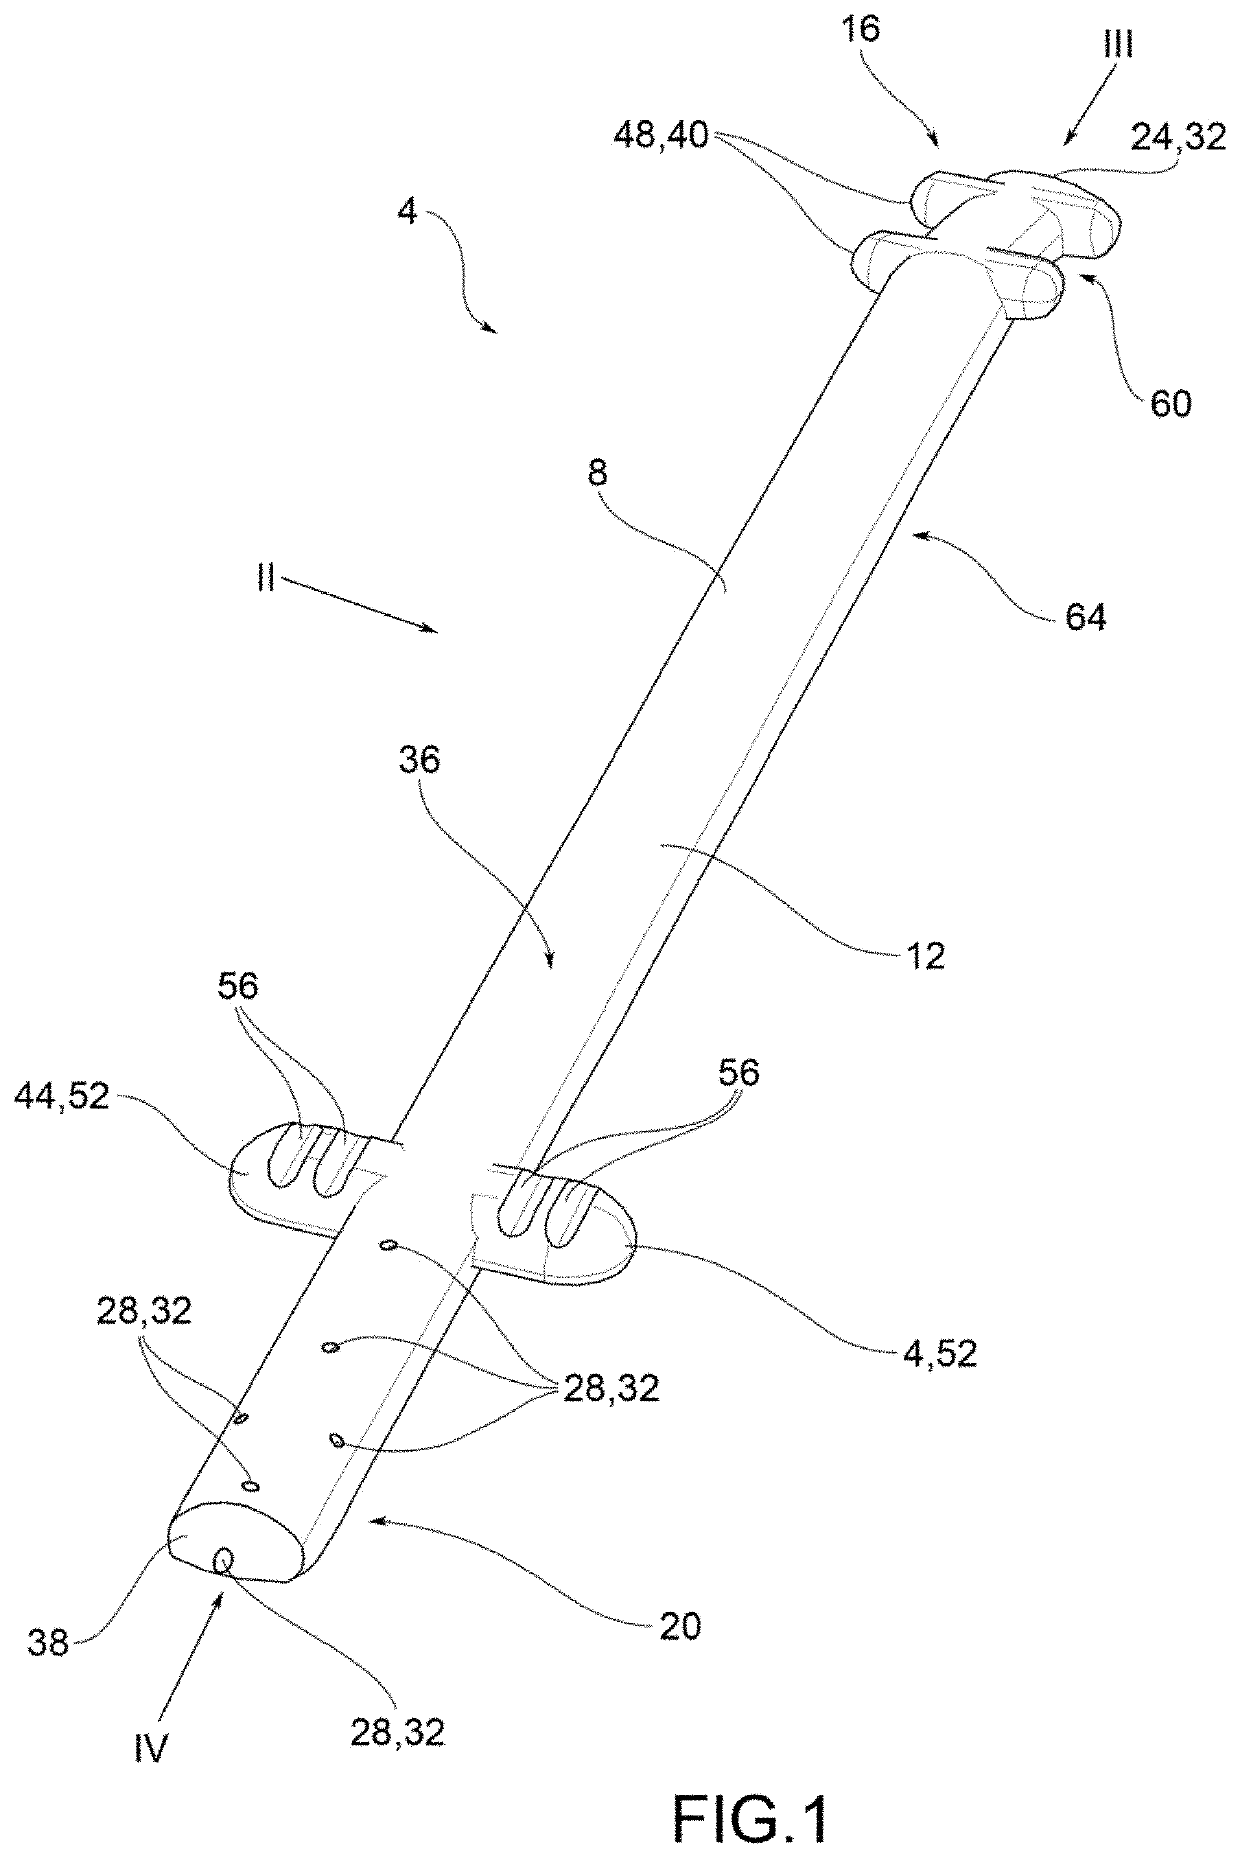 Medical device for glaucoma surgery with controlled and modulable filtration